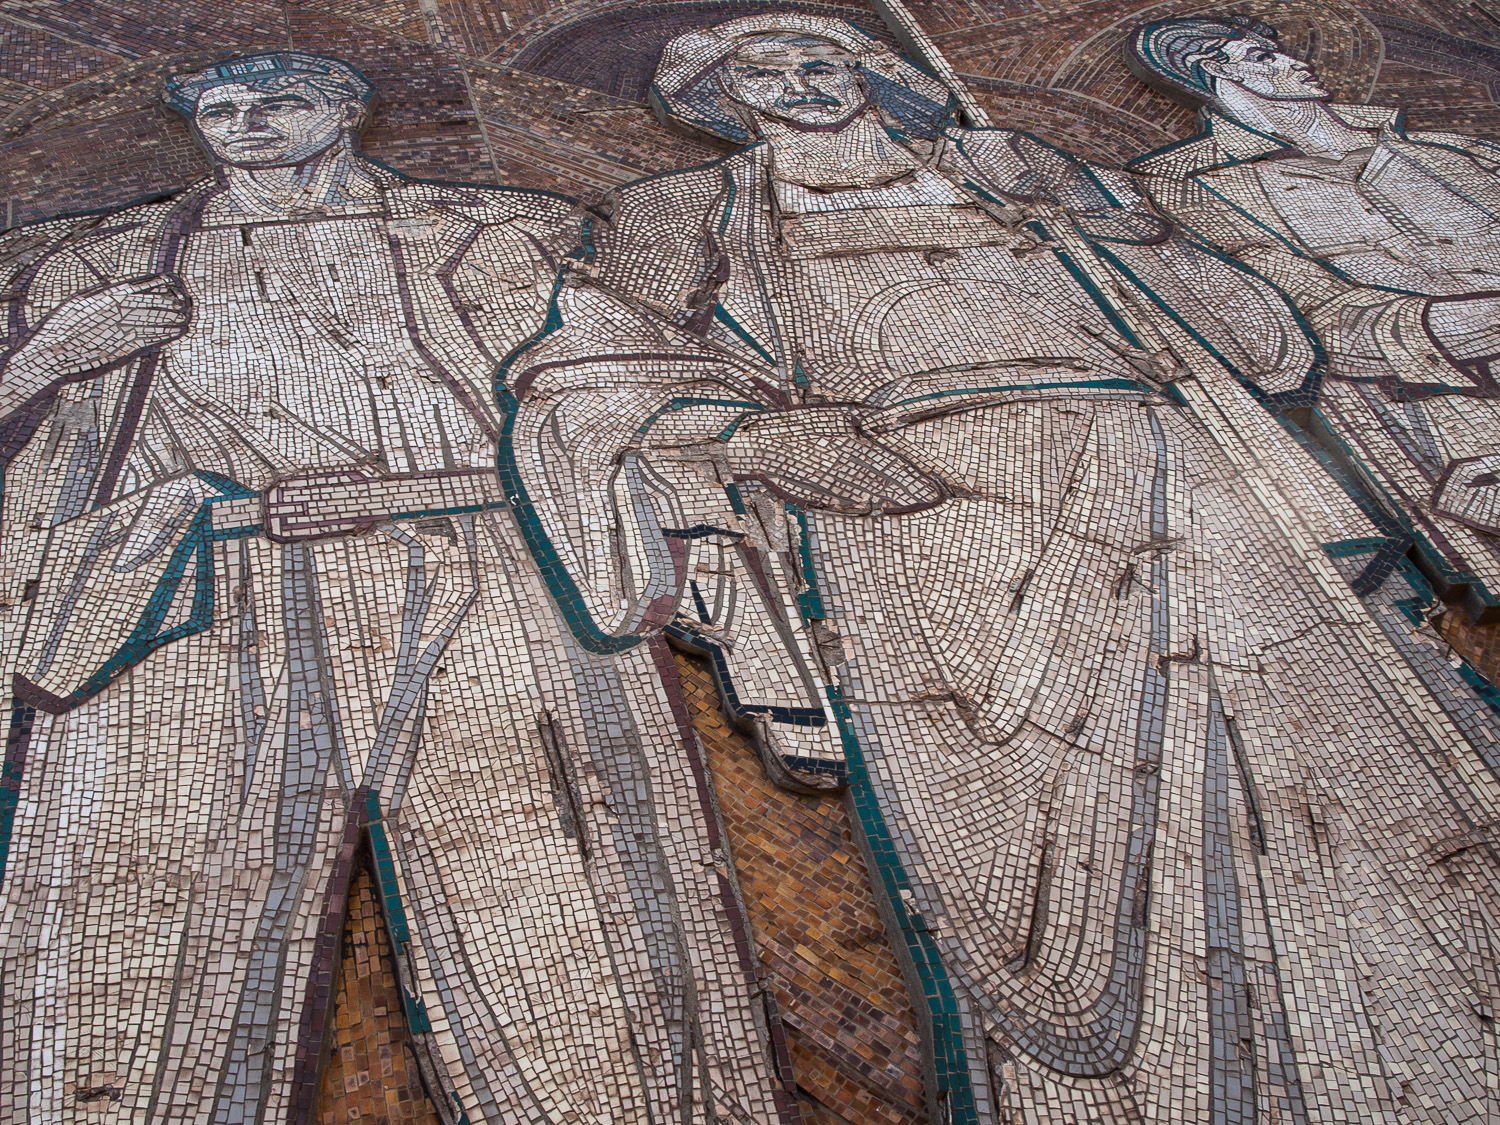   A Soviet­-era mosaic outside the Kryvorizhstal plant in the city of Kryvyi Rih. The city is a major centre of steel production and iron ore mining.  